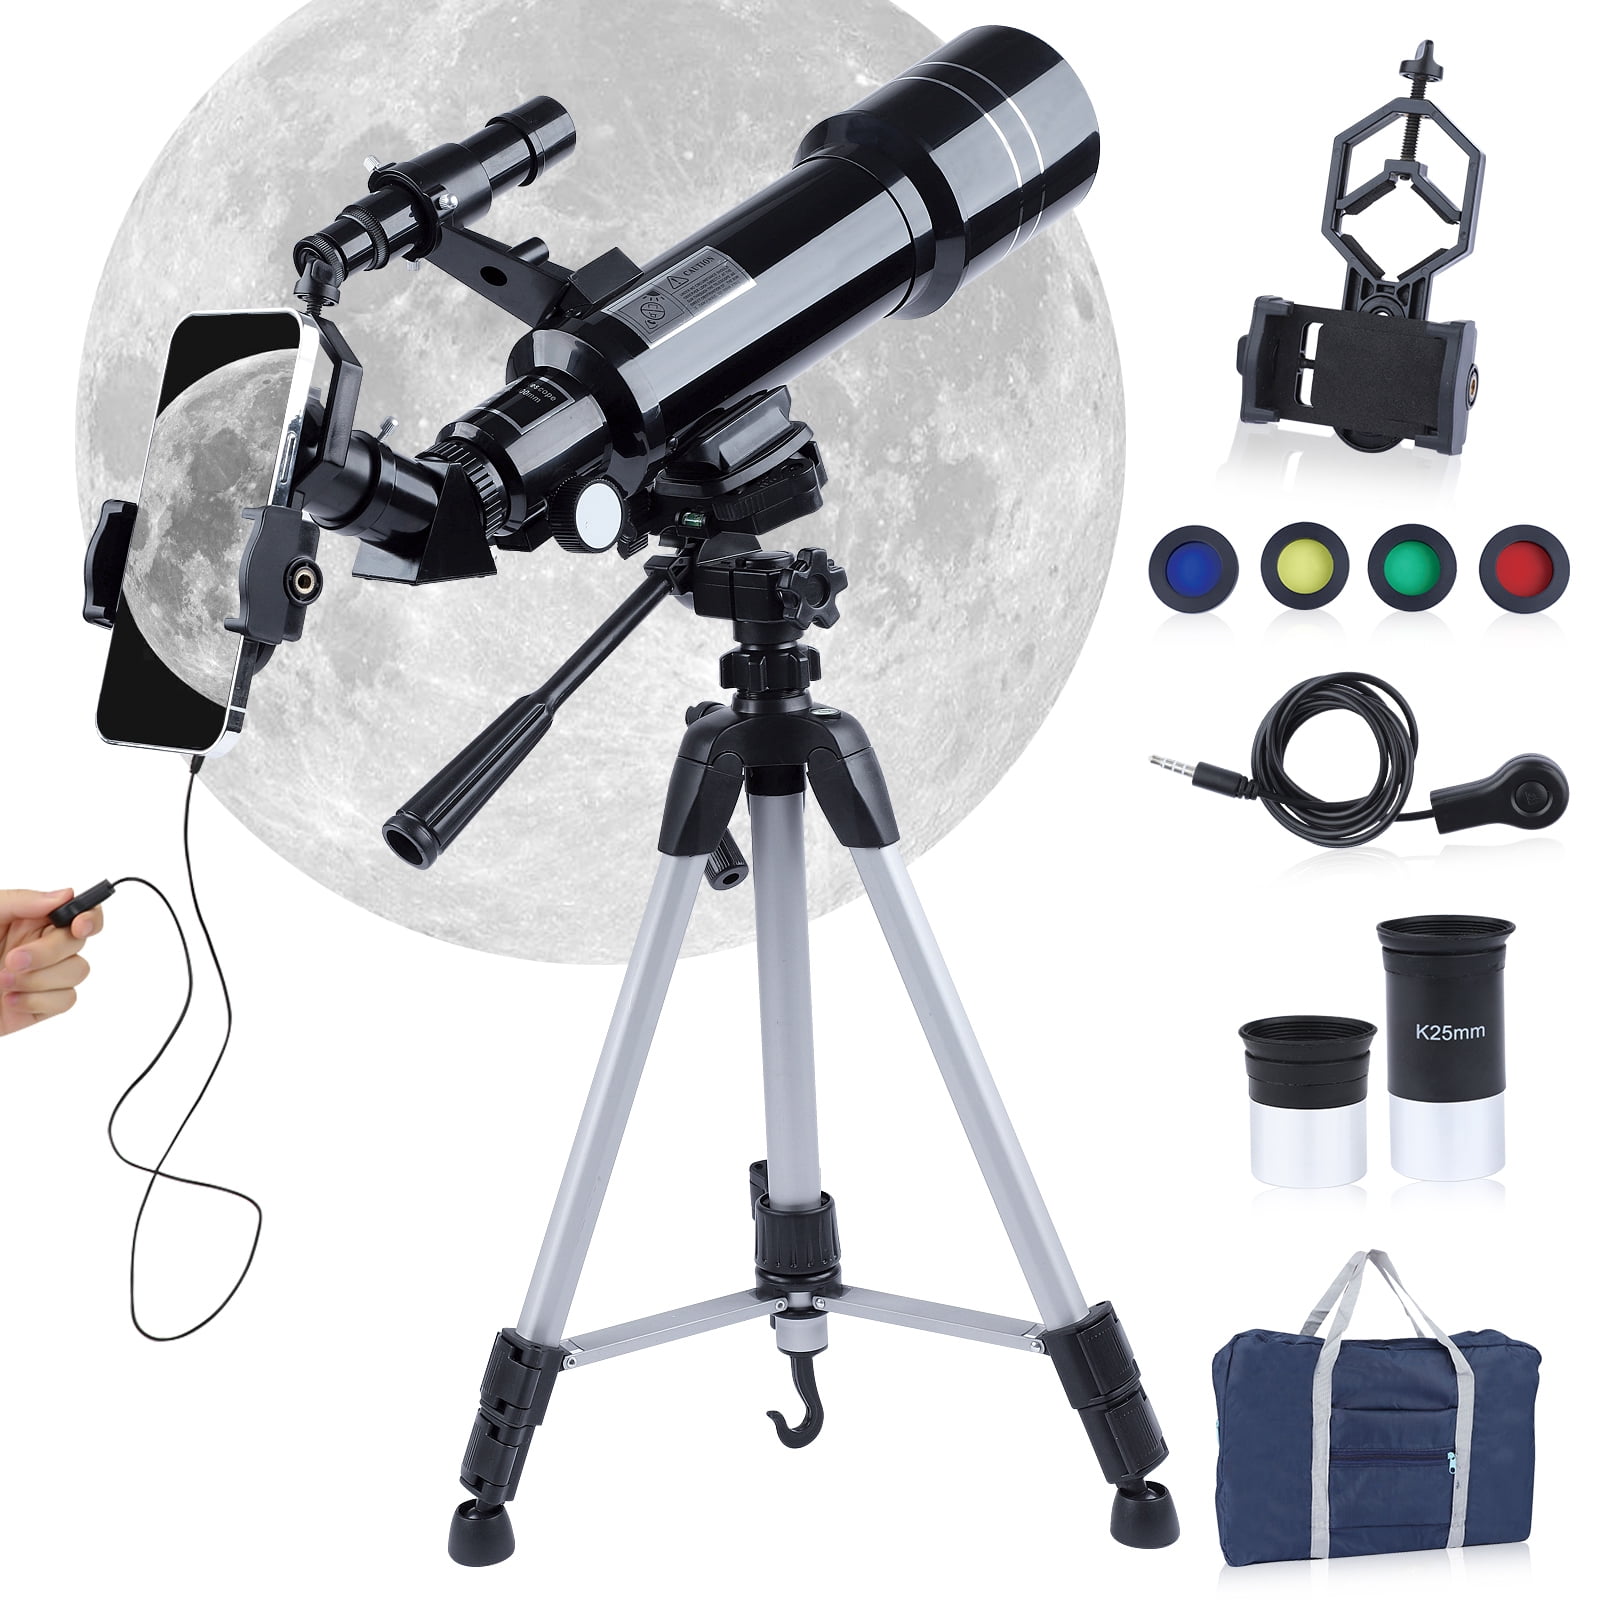 Details about   70mm Astronomical Telescope F30070 w/ Tripod  Zoom HD Outdoor Monocular Moon New 